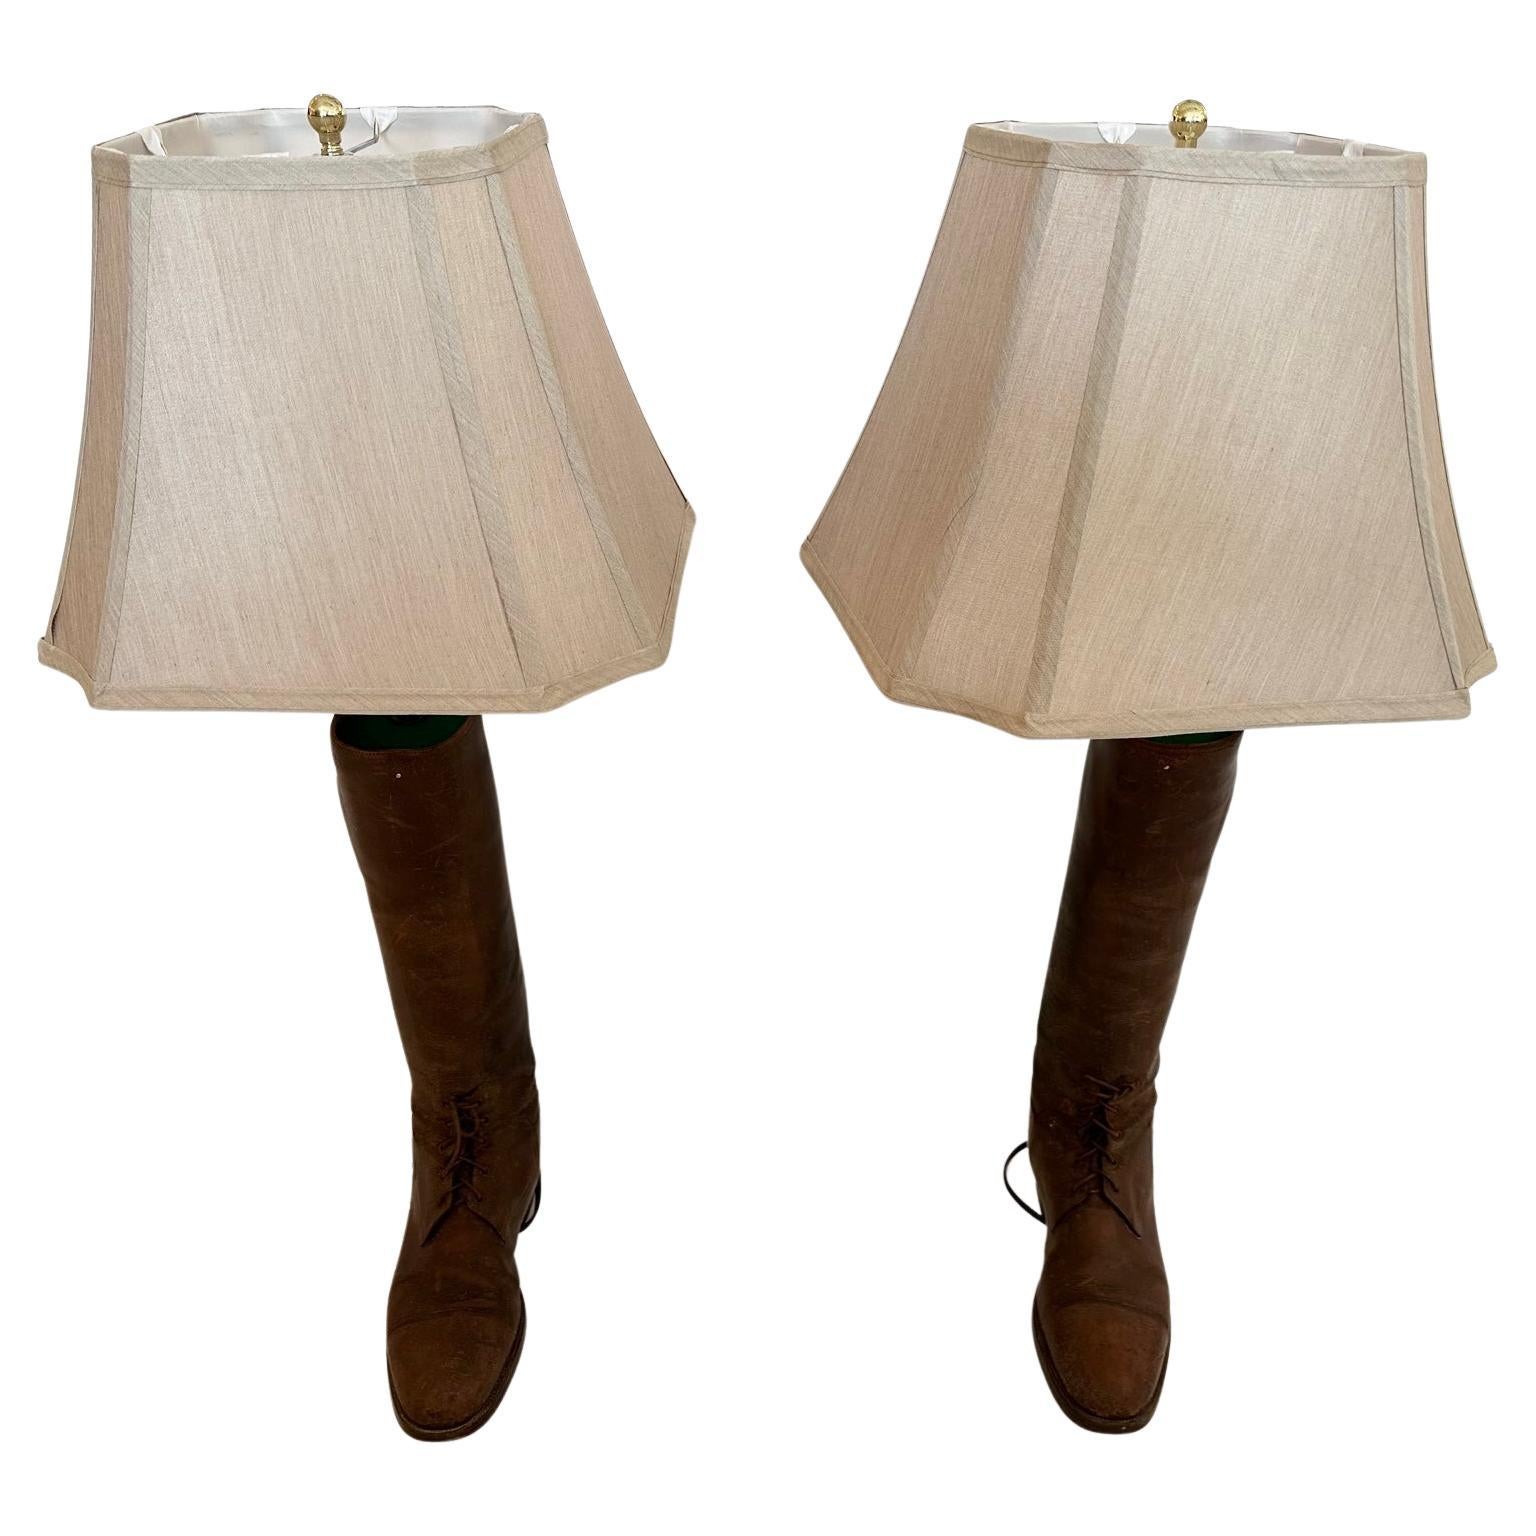 Unusual and rich in character pair of custom table lamps created out of crusty antique English leather riding boots.